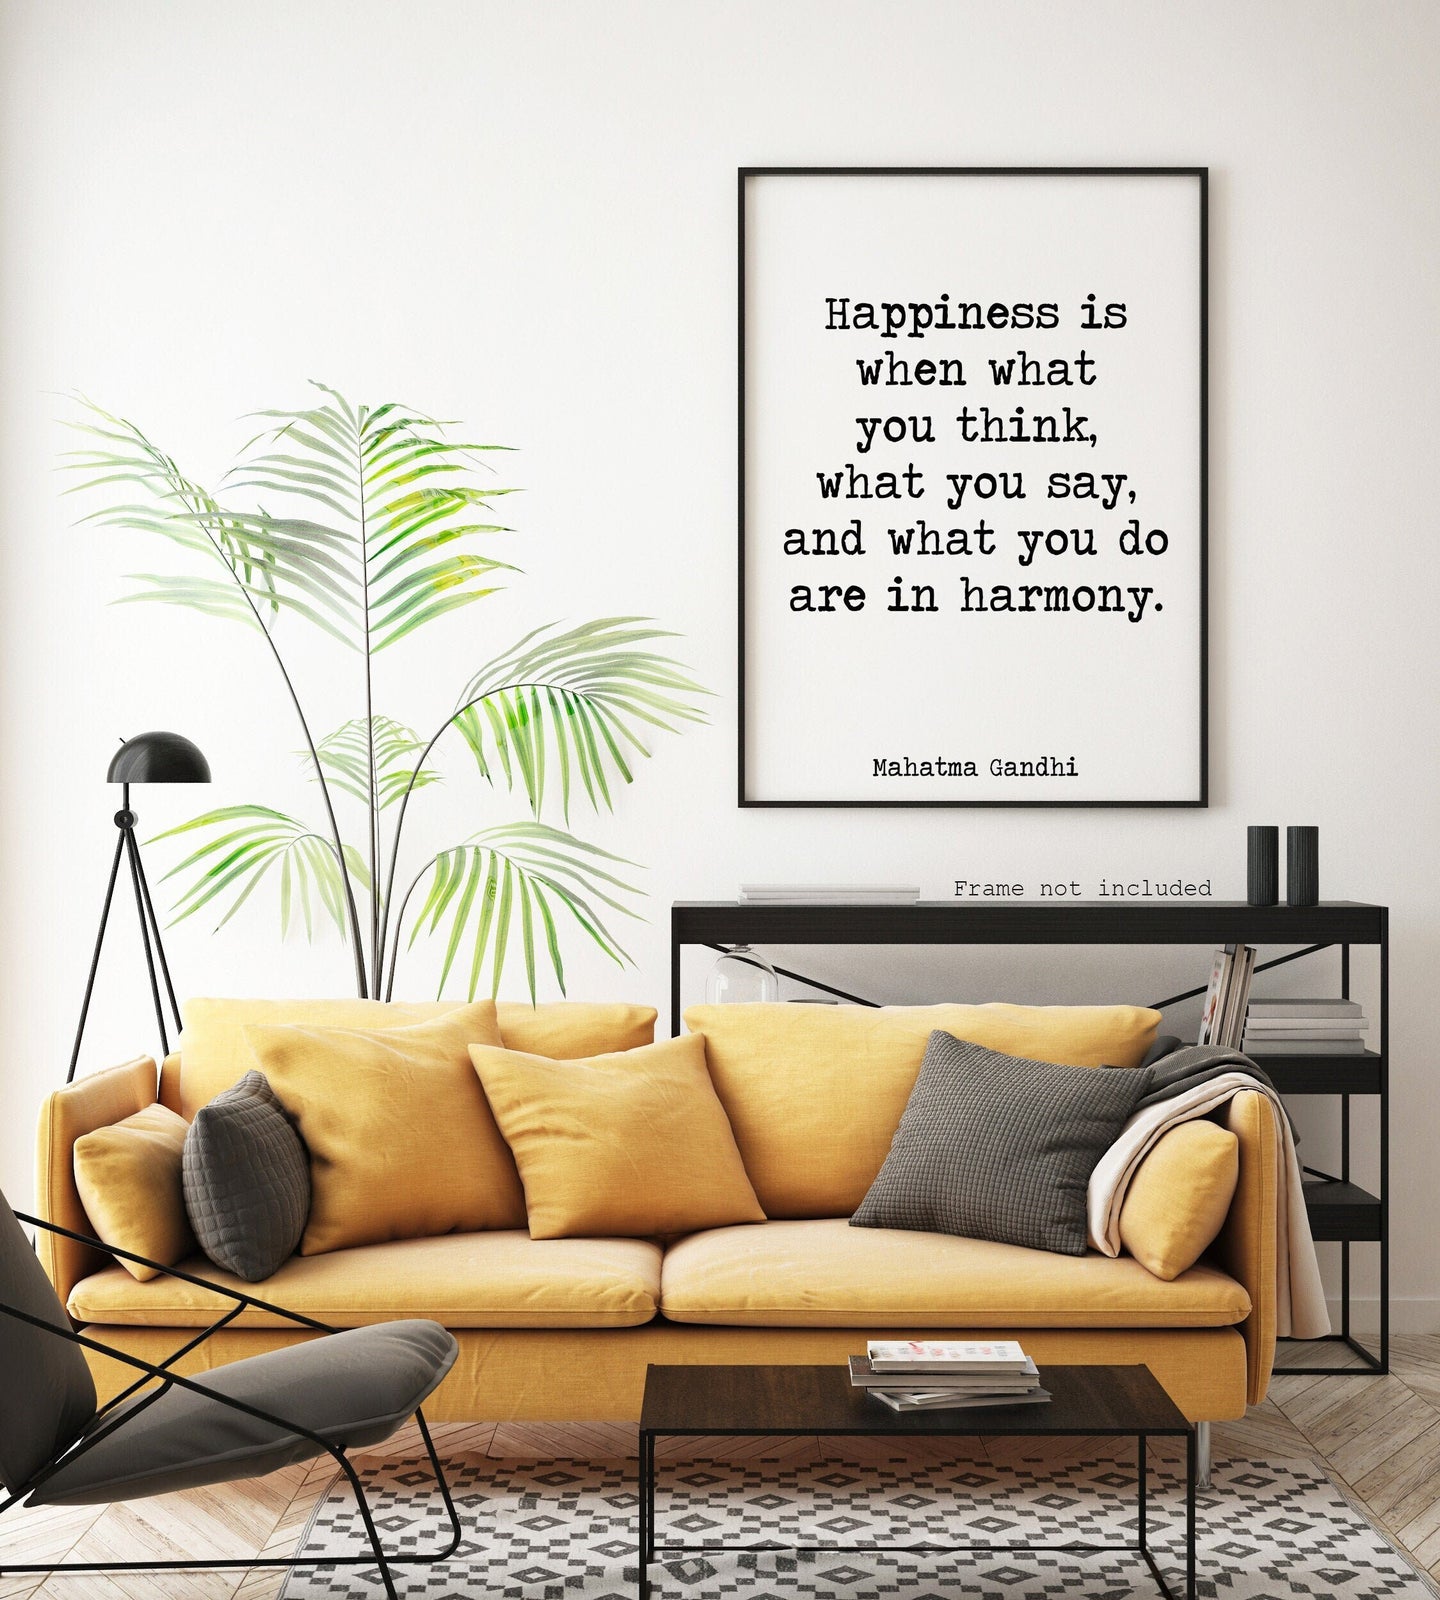 Gandhi quote Happiness print - Happiness is when what you think, what you say, and what you do are in harmony office decor home decor poster